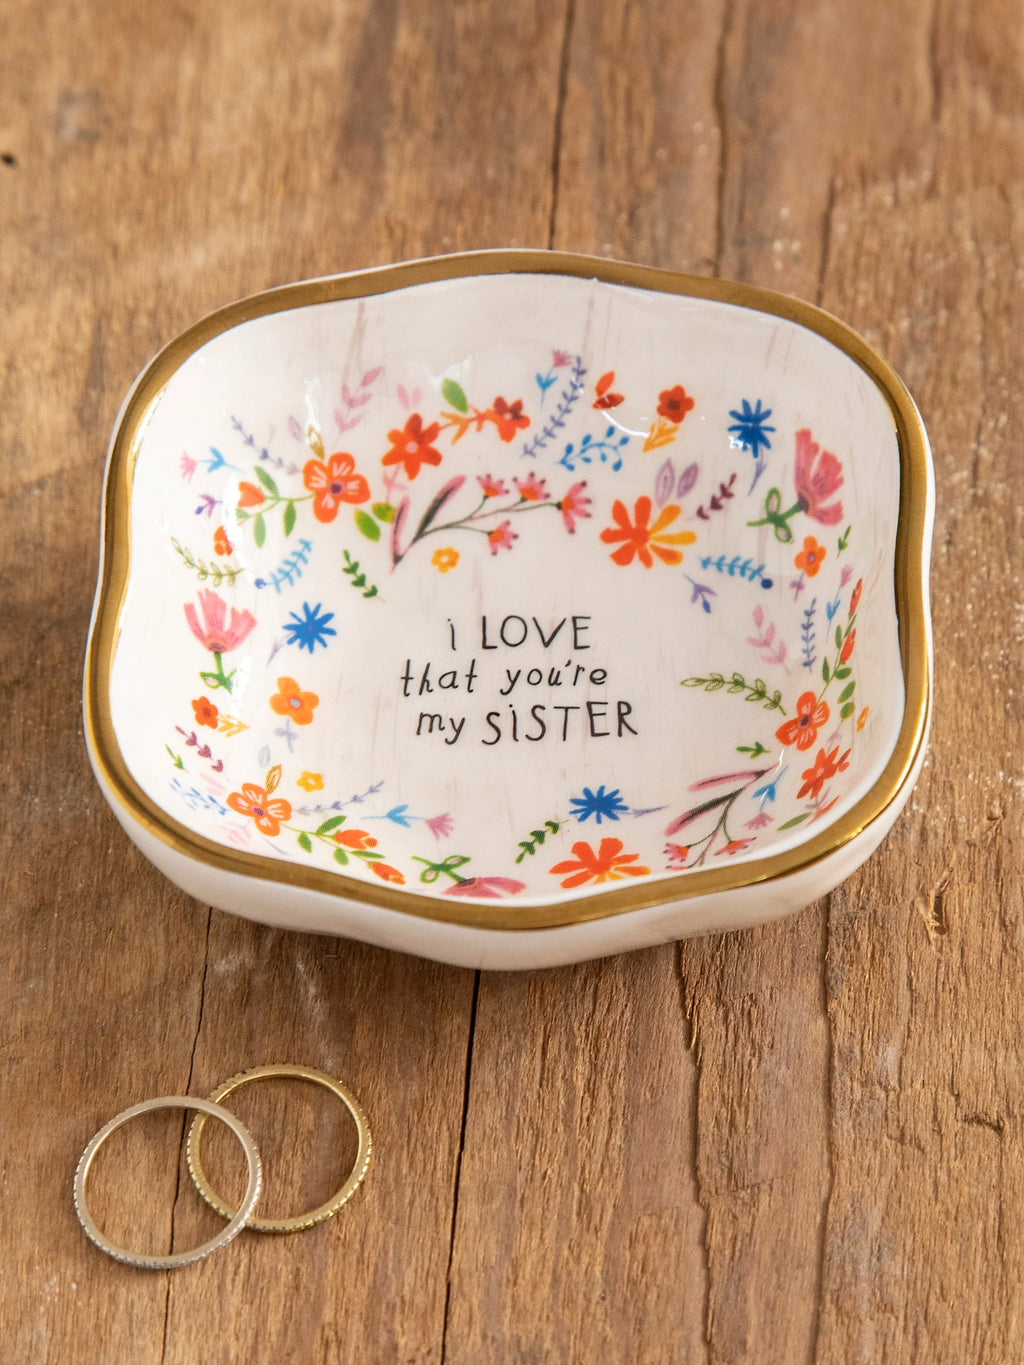 Natural Life Antiqued Trinket Bowl - I Love That You’re My Sister